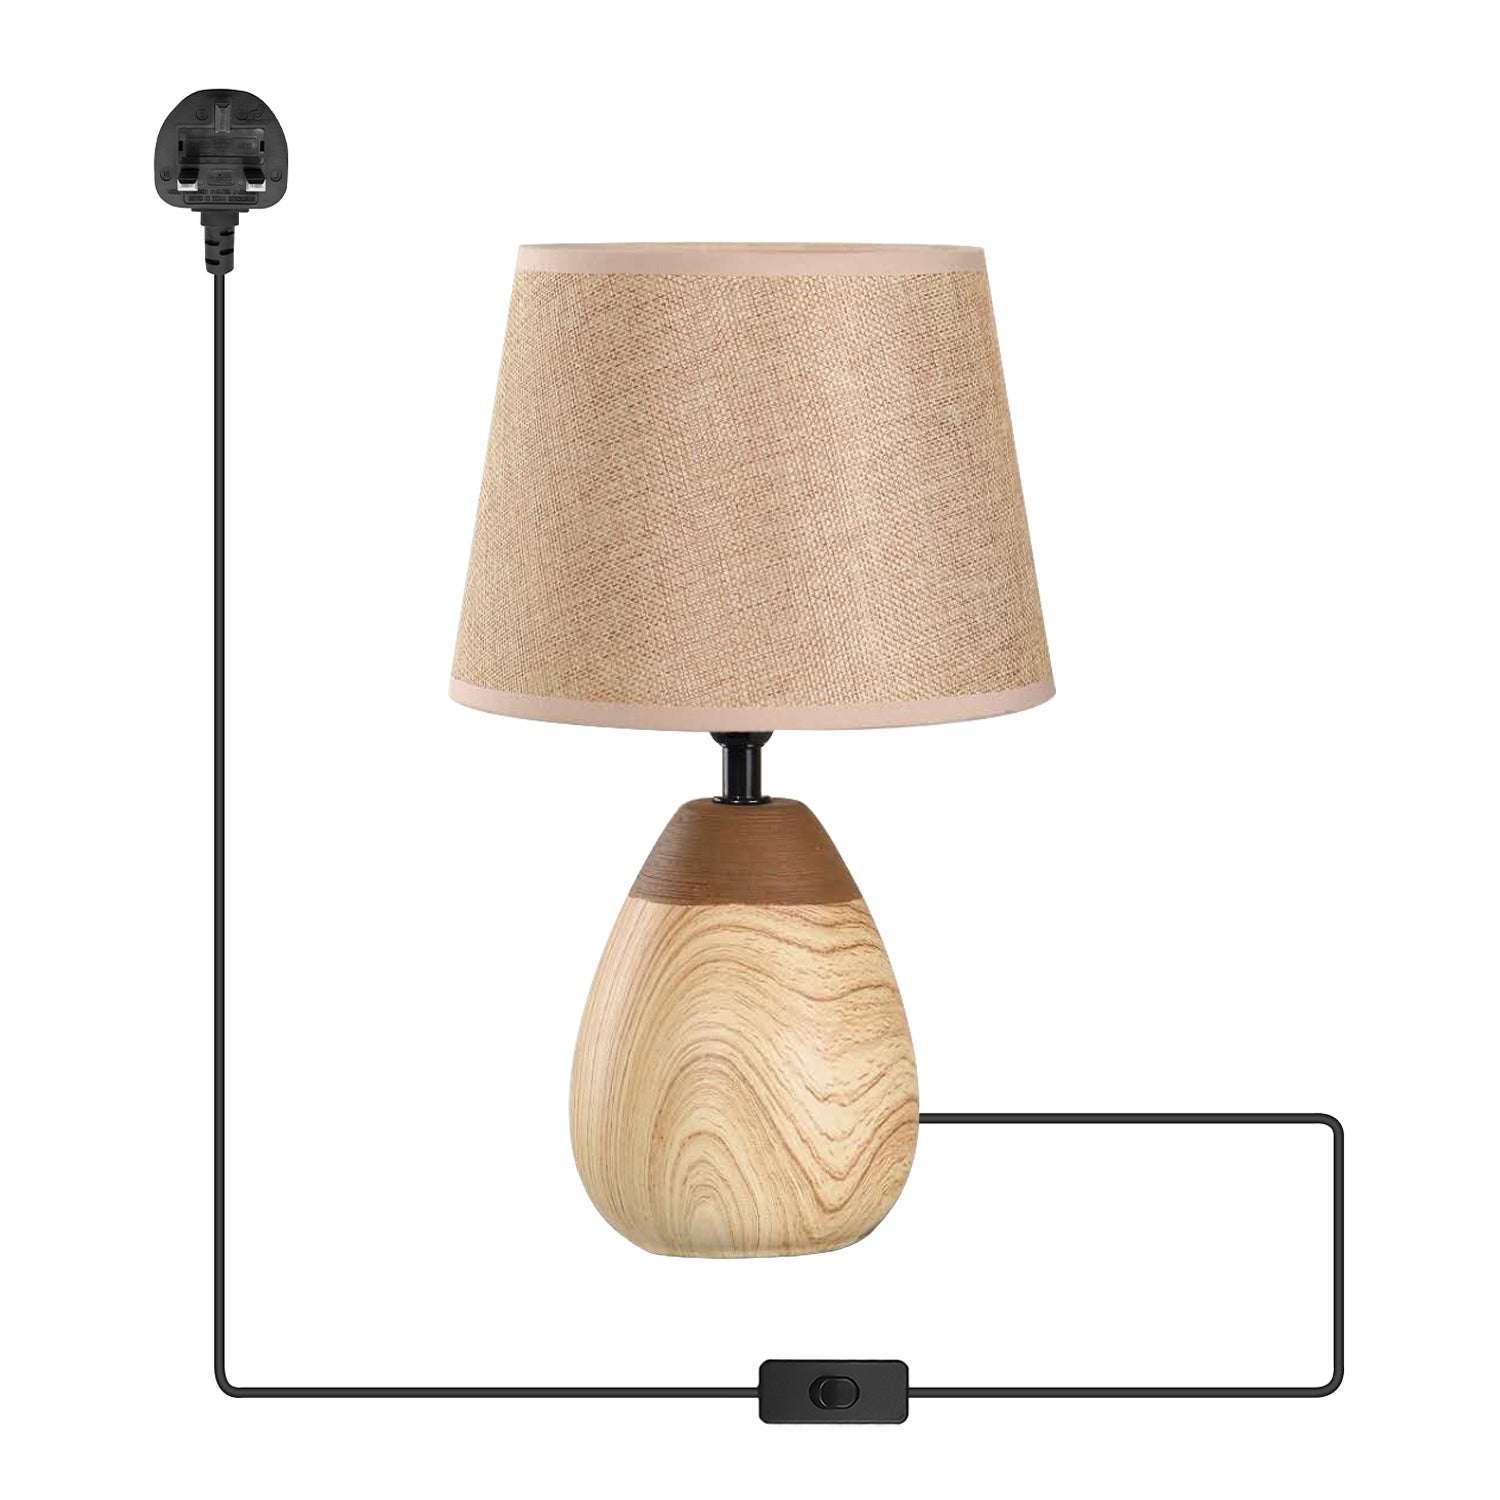 fabric lampshade ceramic base on/off switch table lamp